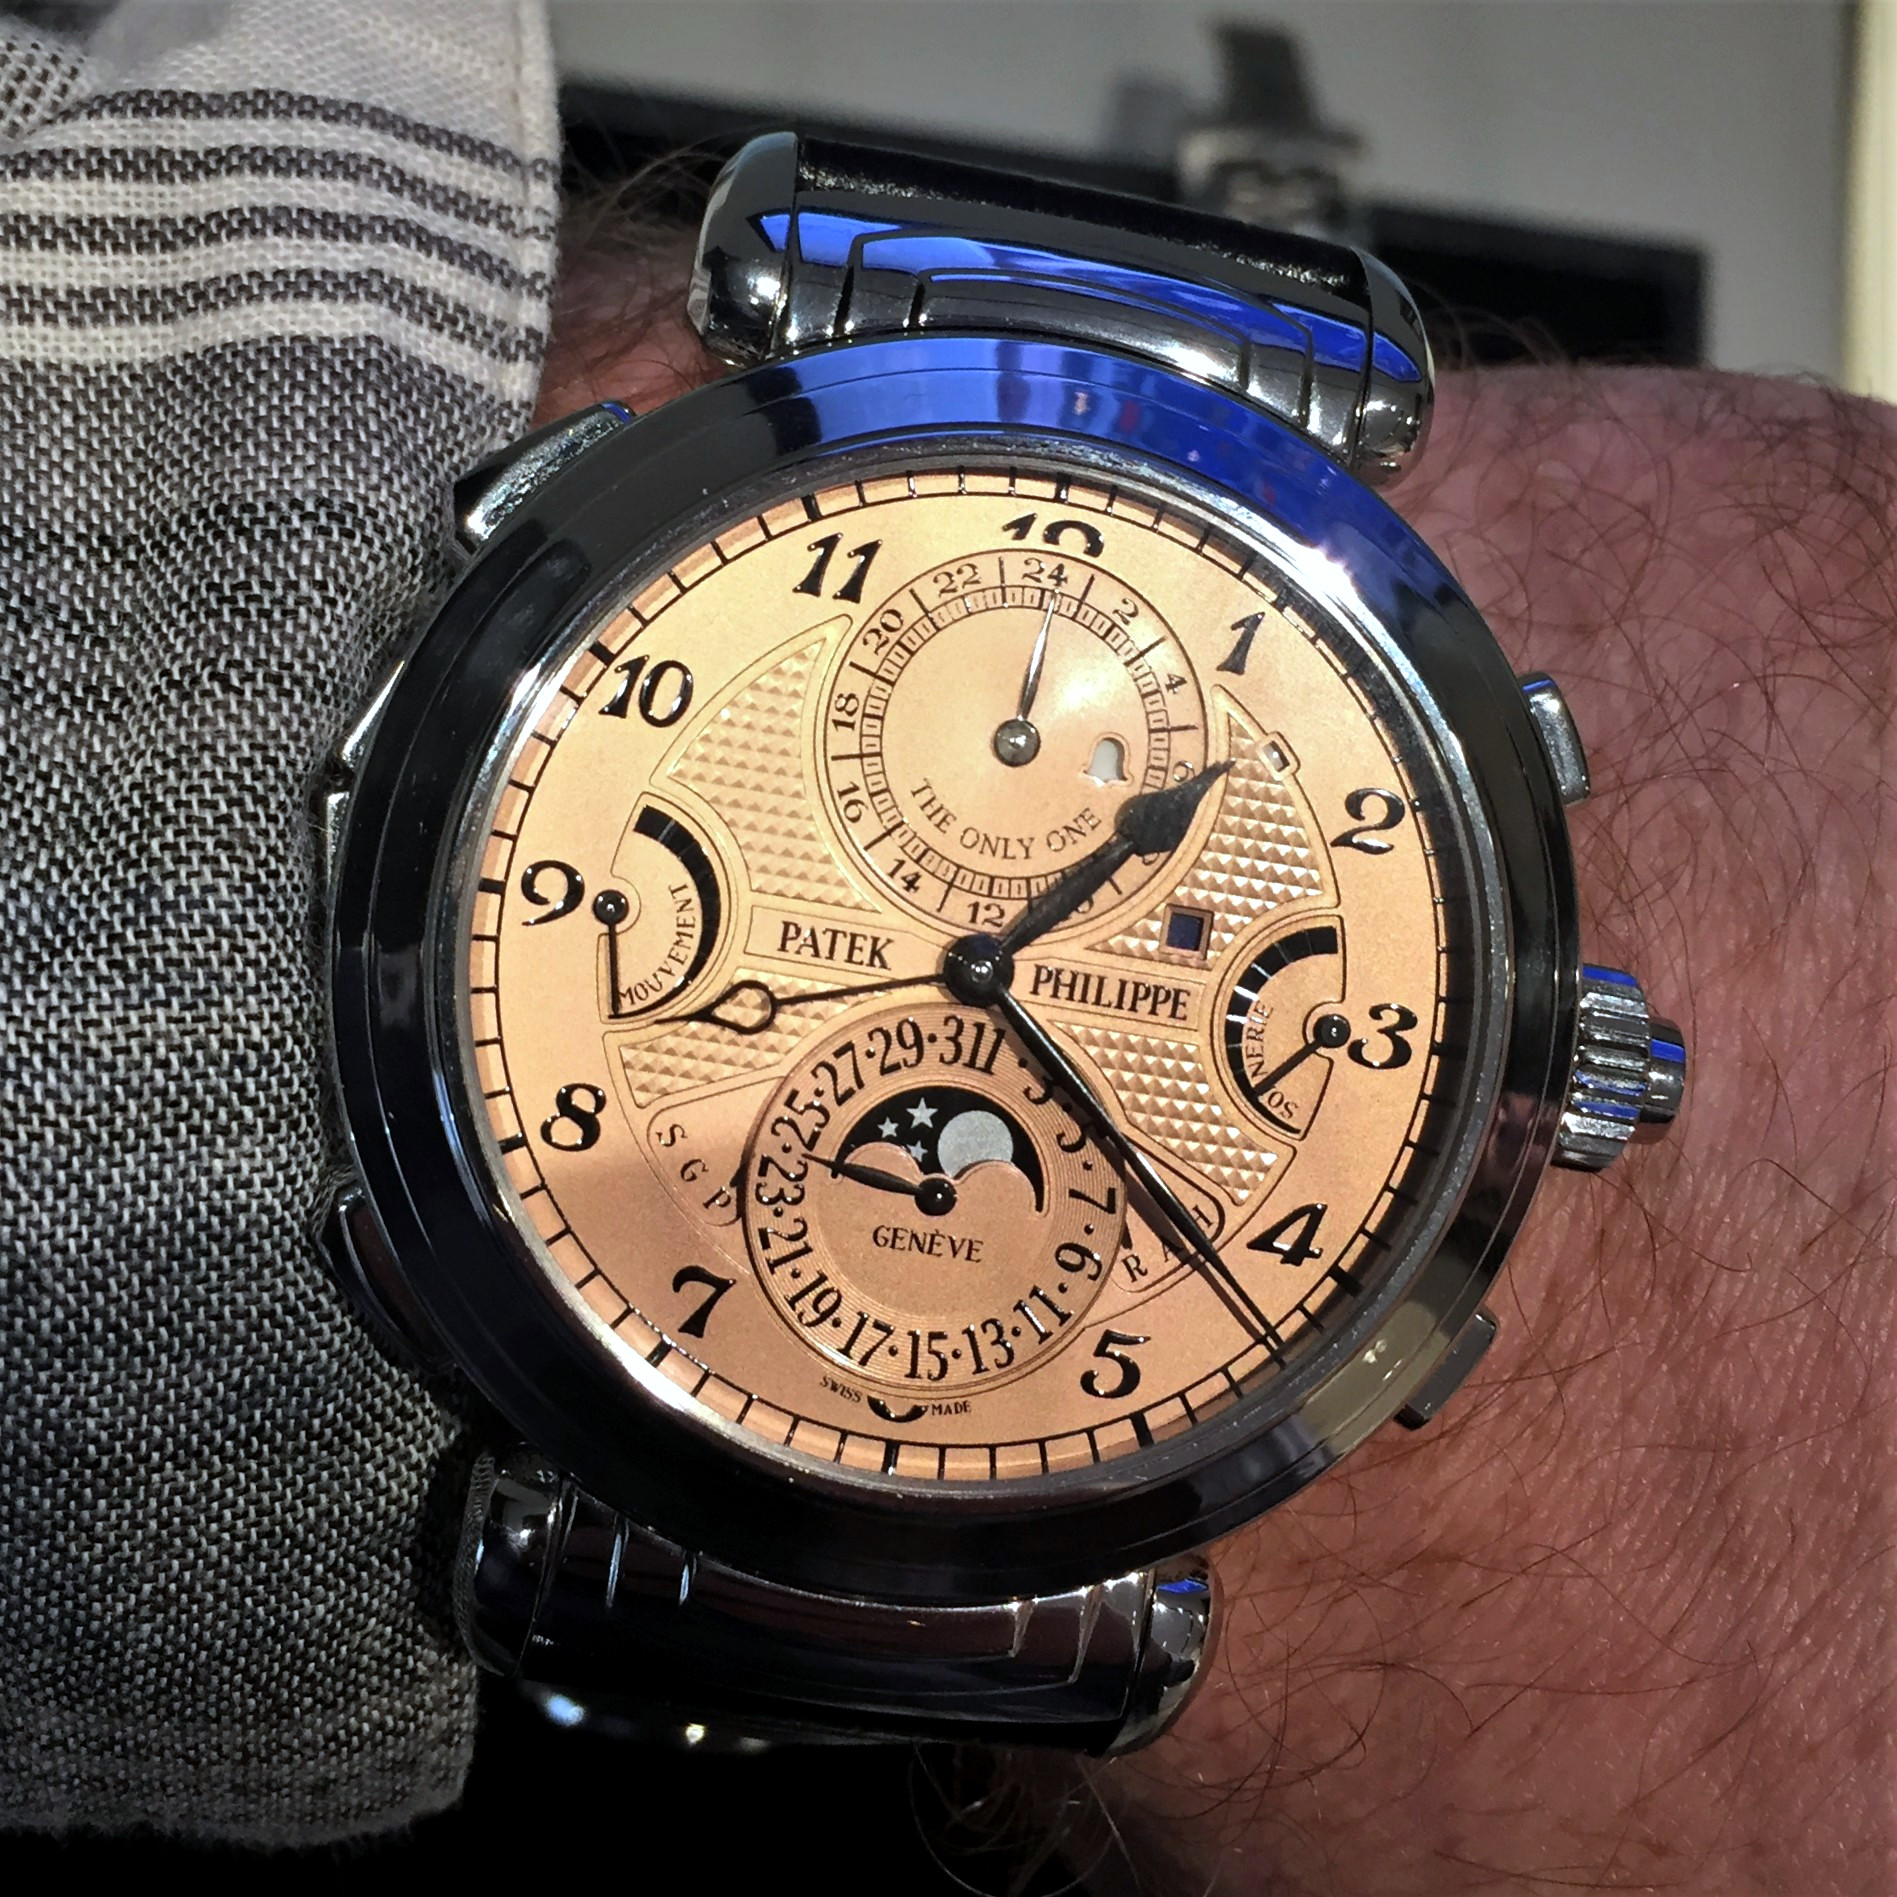 Patek Philippe Grandmaster Chime 6300A for OnlyWatch 2019 including 5 acoustic watch complications